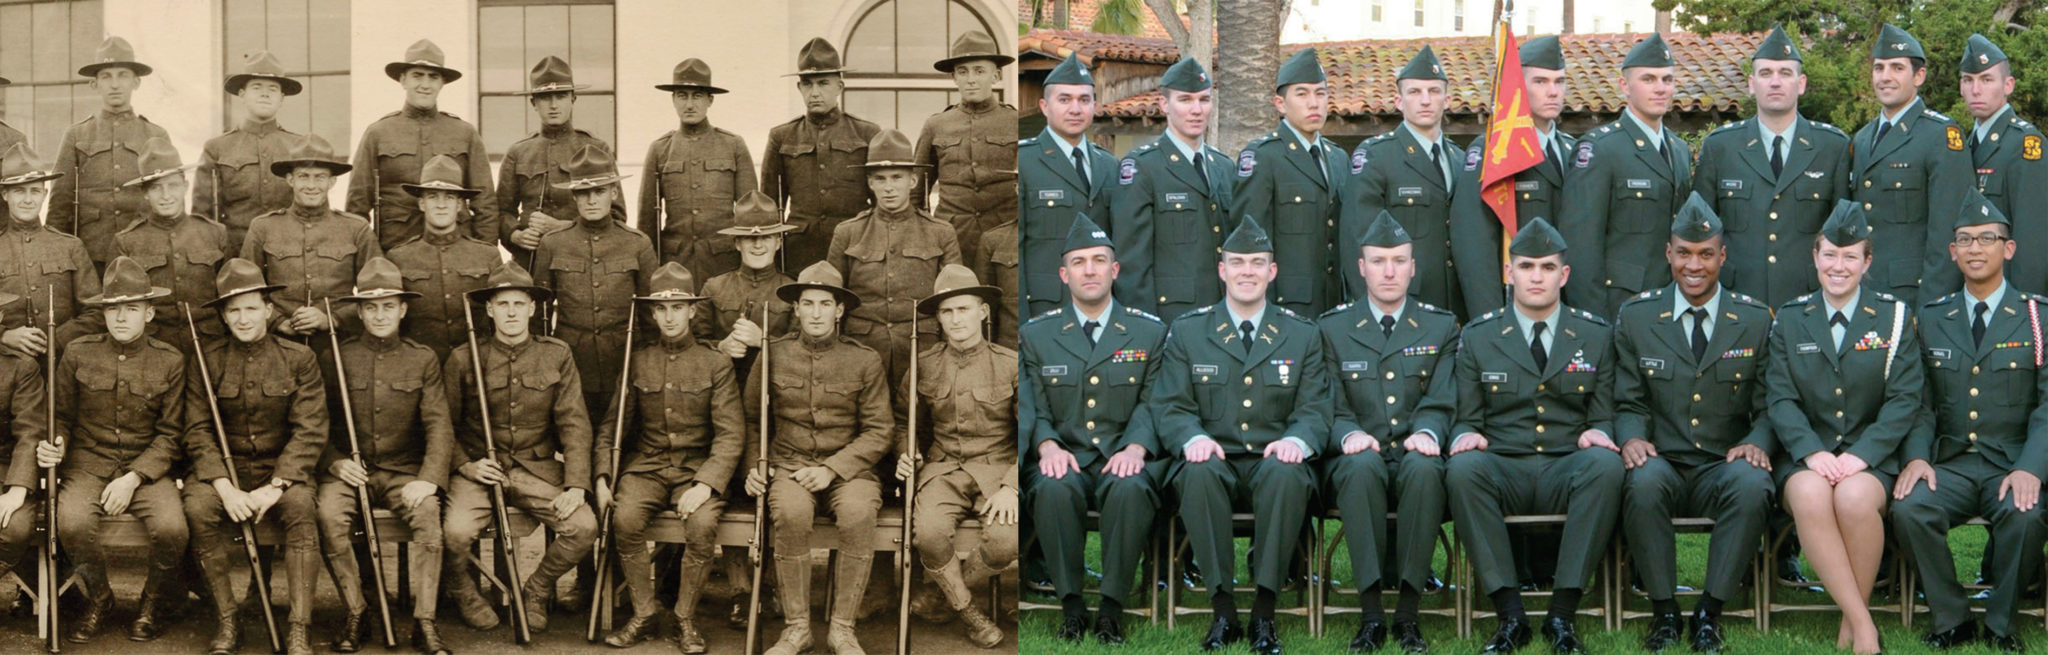 Officers and cadets: Left, the Students' Army Training Corps, Dec. 9, 1918 - Photo by SCU ROTC - and right, the Bronco Battalion in early 2011 - Photo by Charles Barry